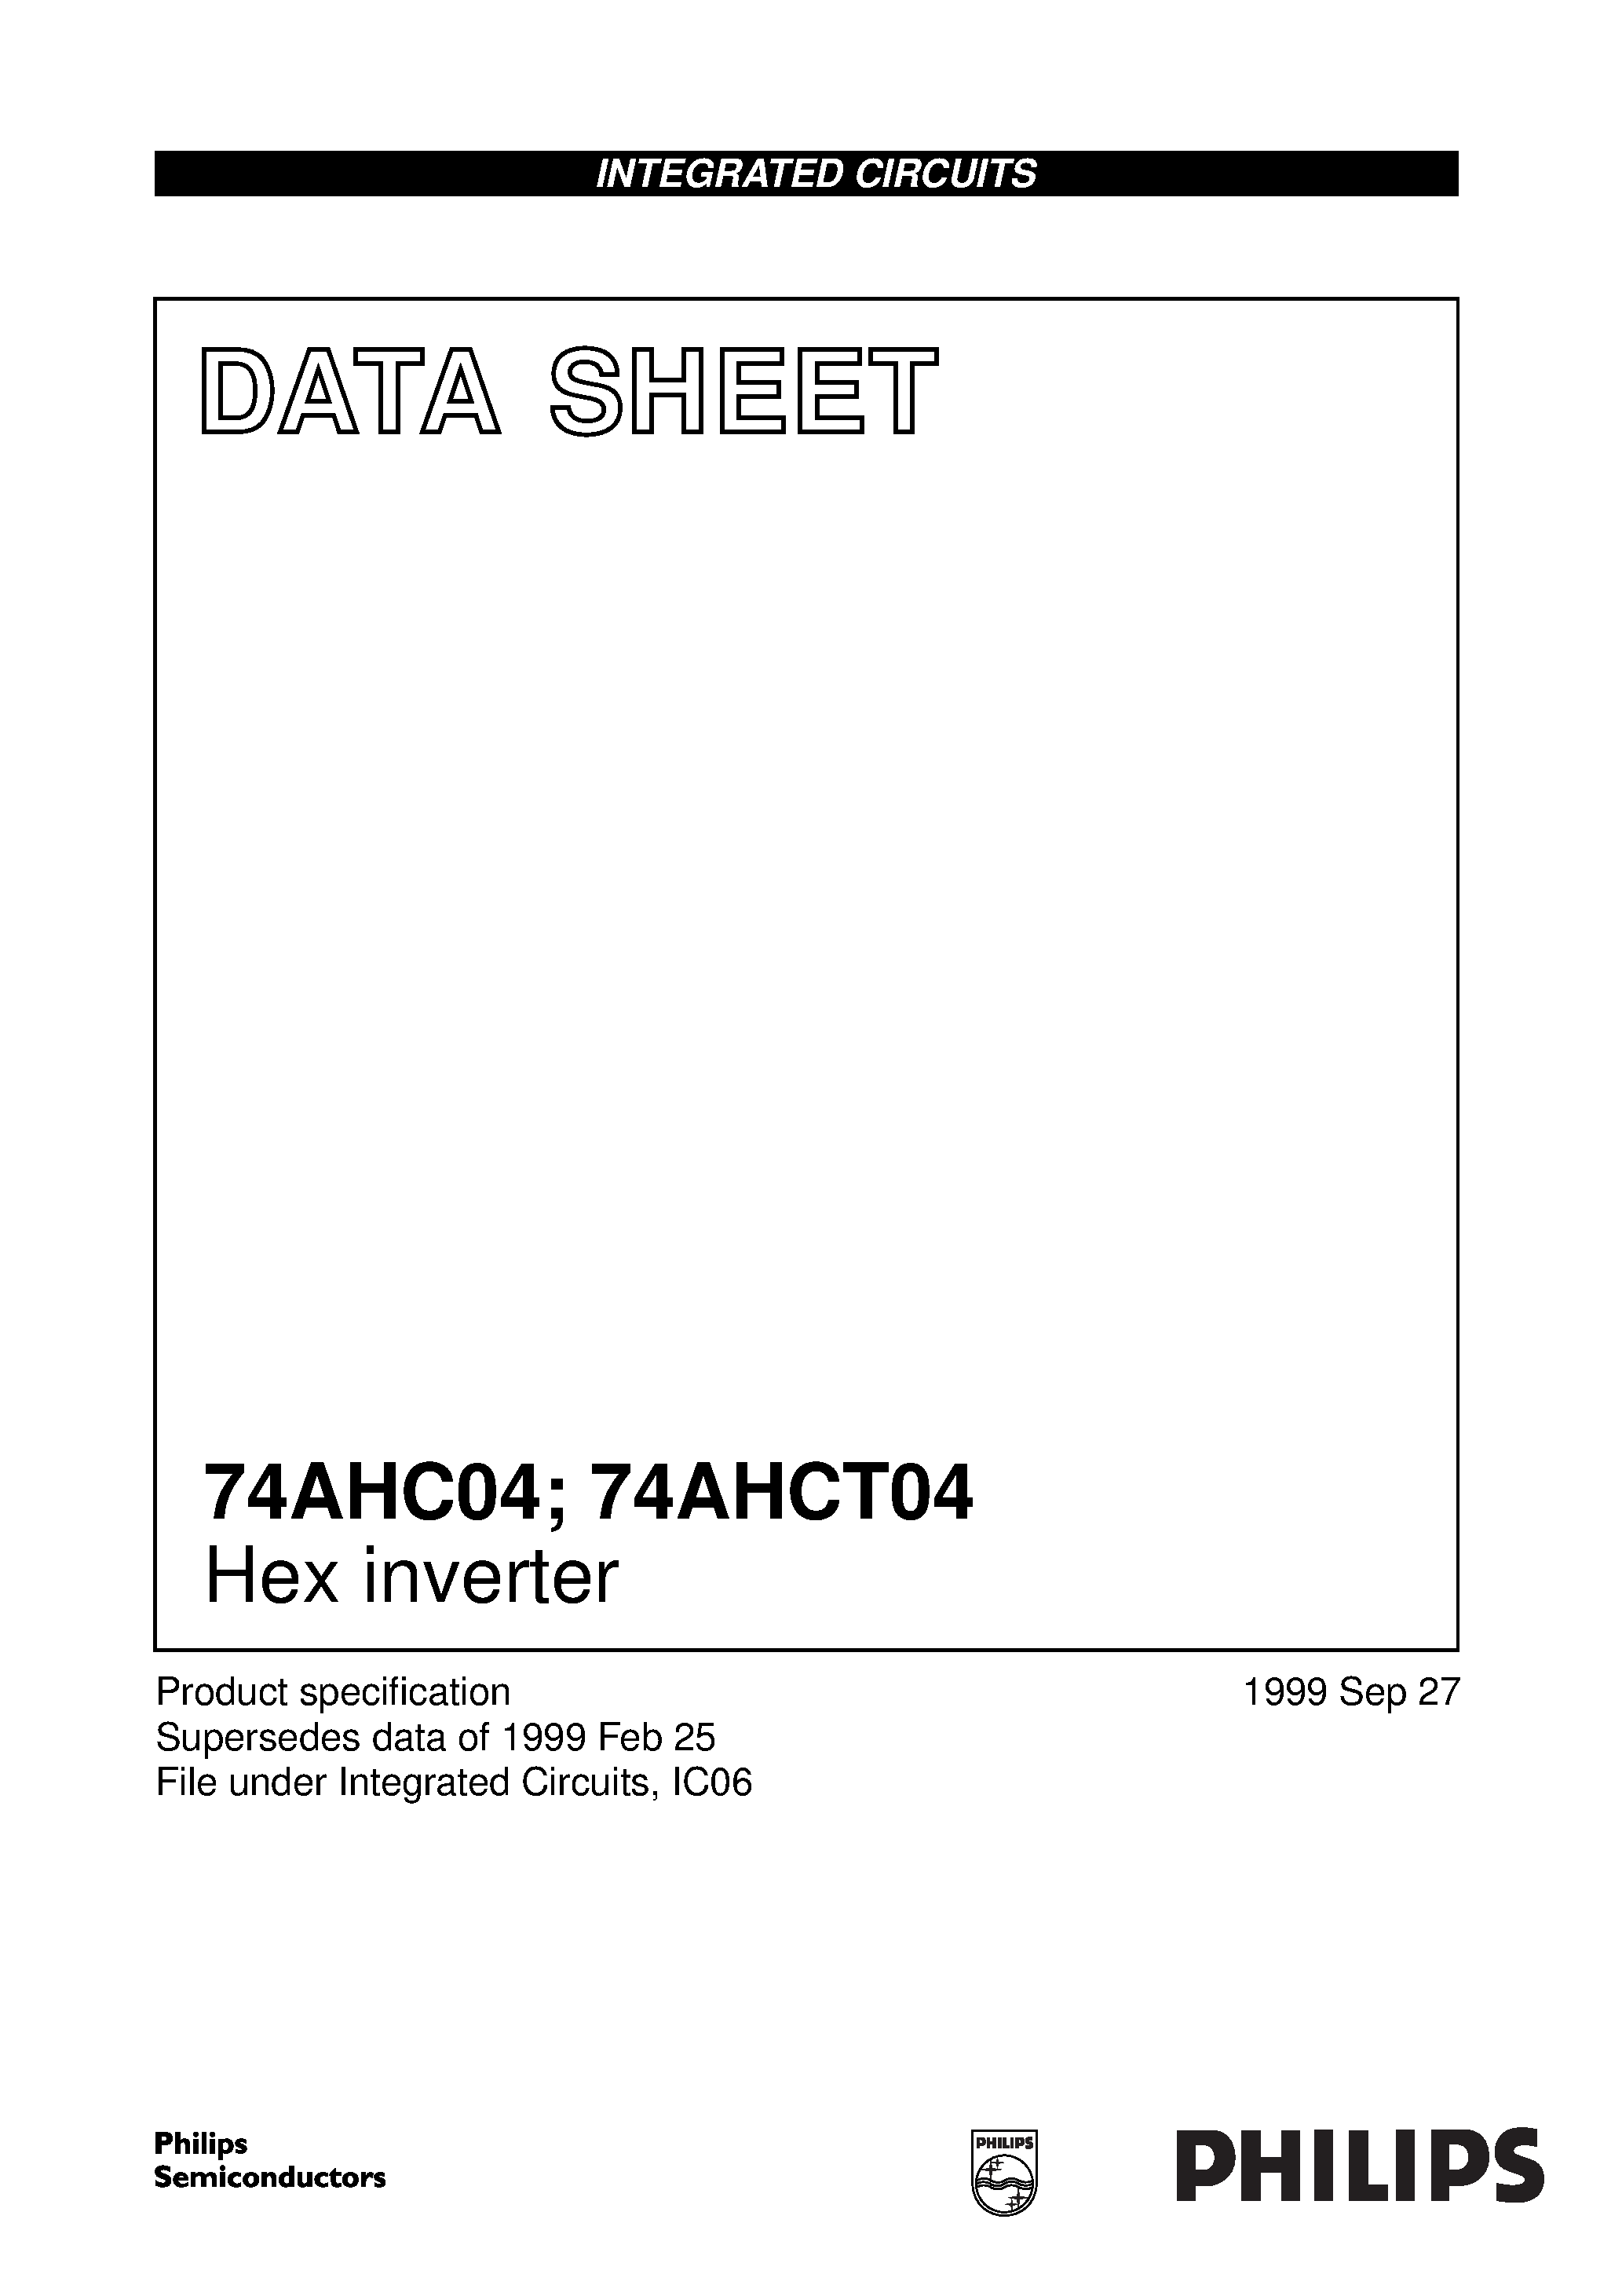 Datasheet 74AHC04PW - Hex inverter page 1